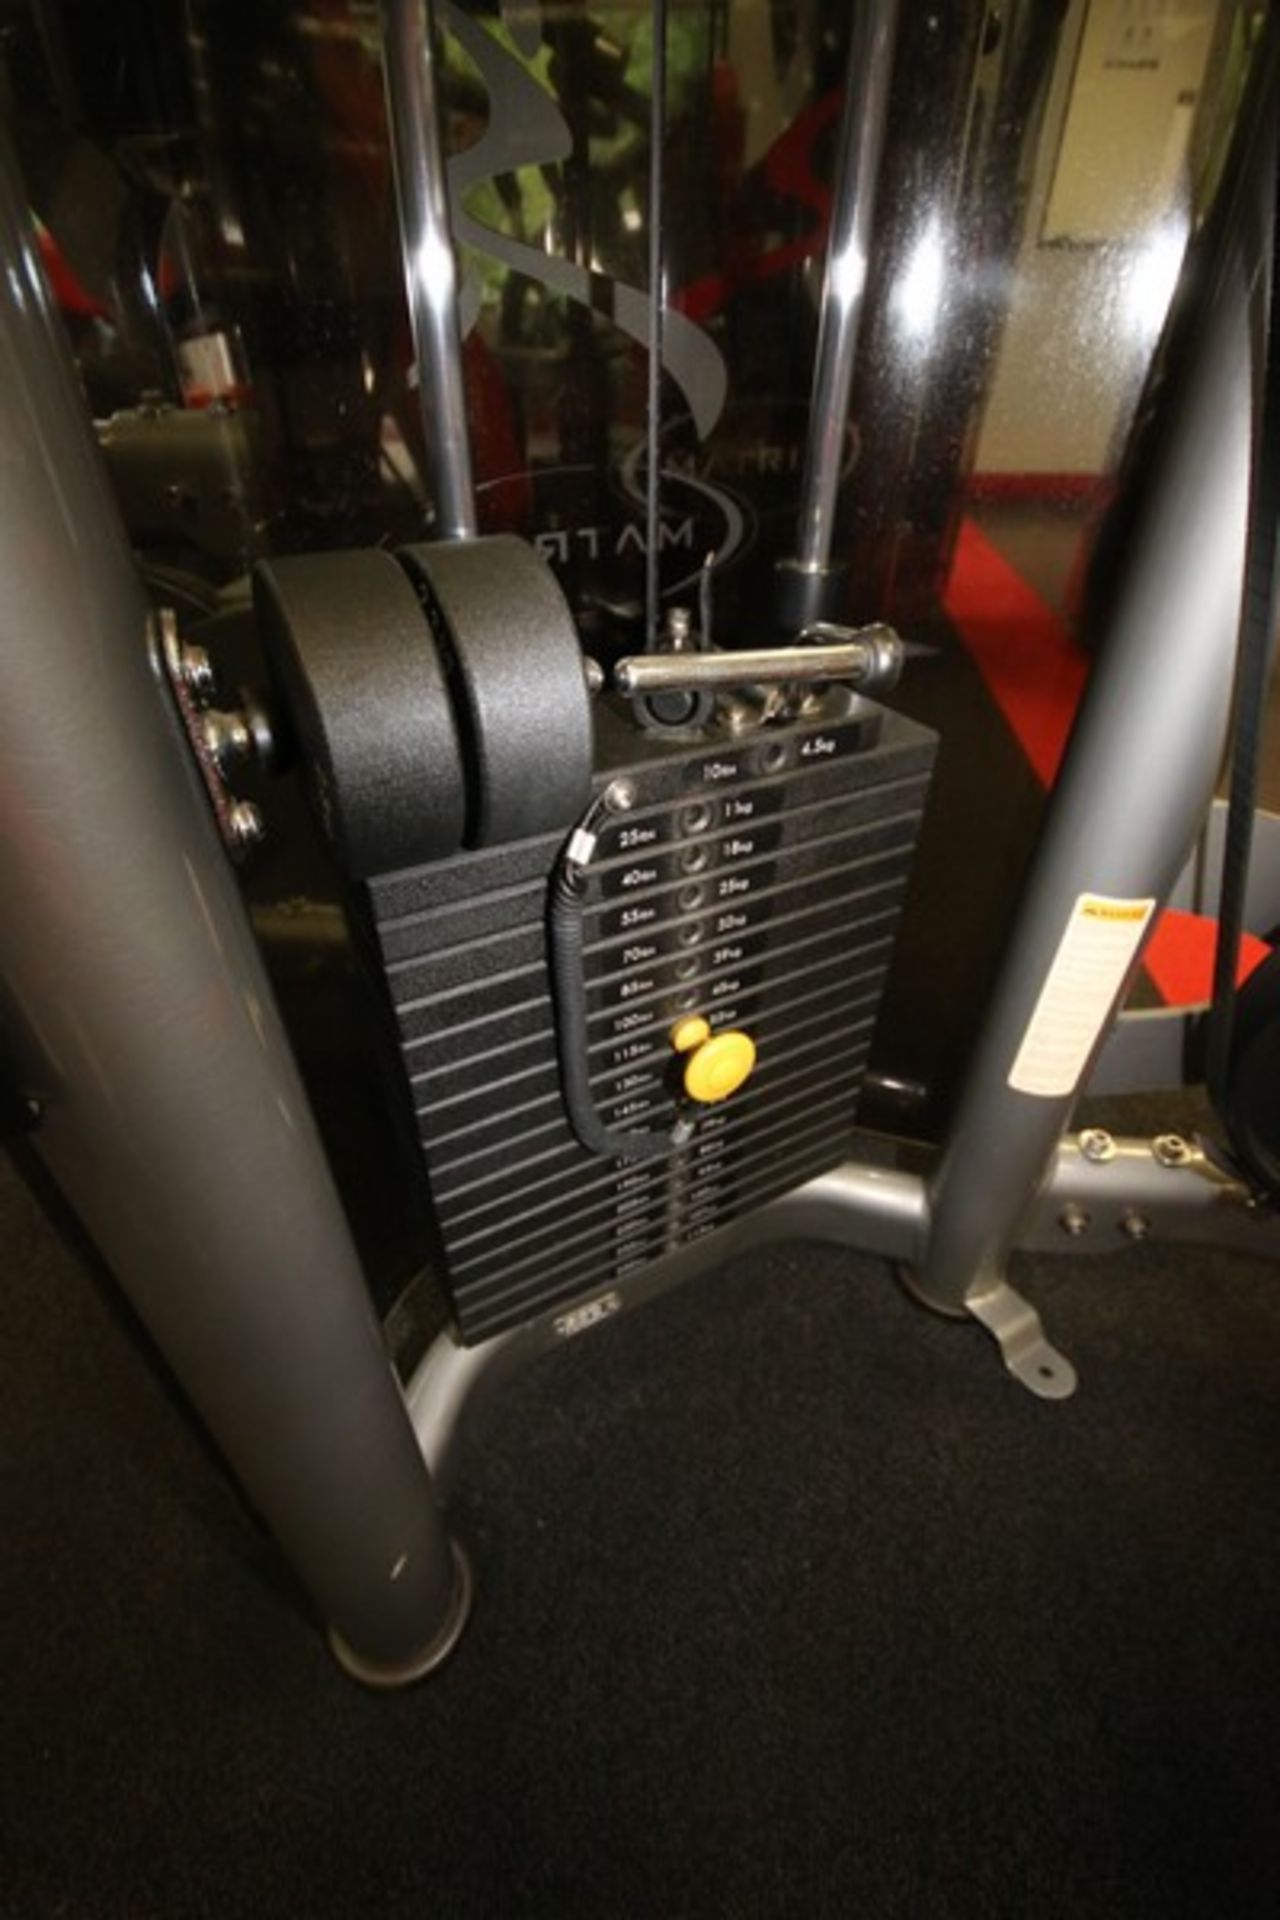 Matrix Chest Press Cable Machine, 10-250 lbs. Weight Range on Plates, Overall Dims.: Aprox. 64" L - Image 3 of 4